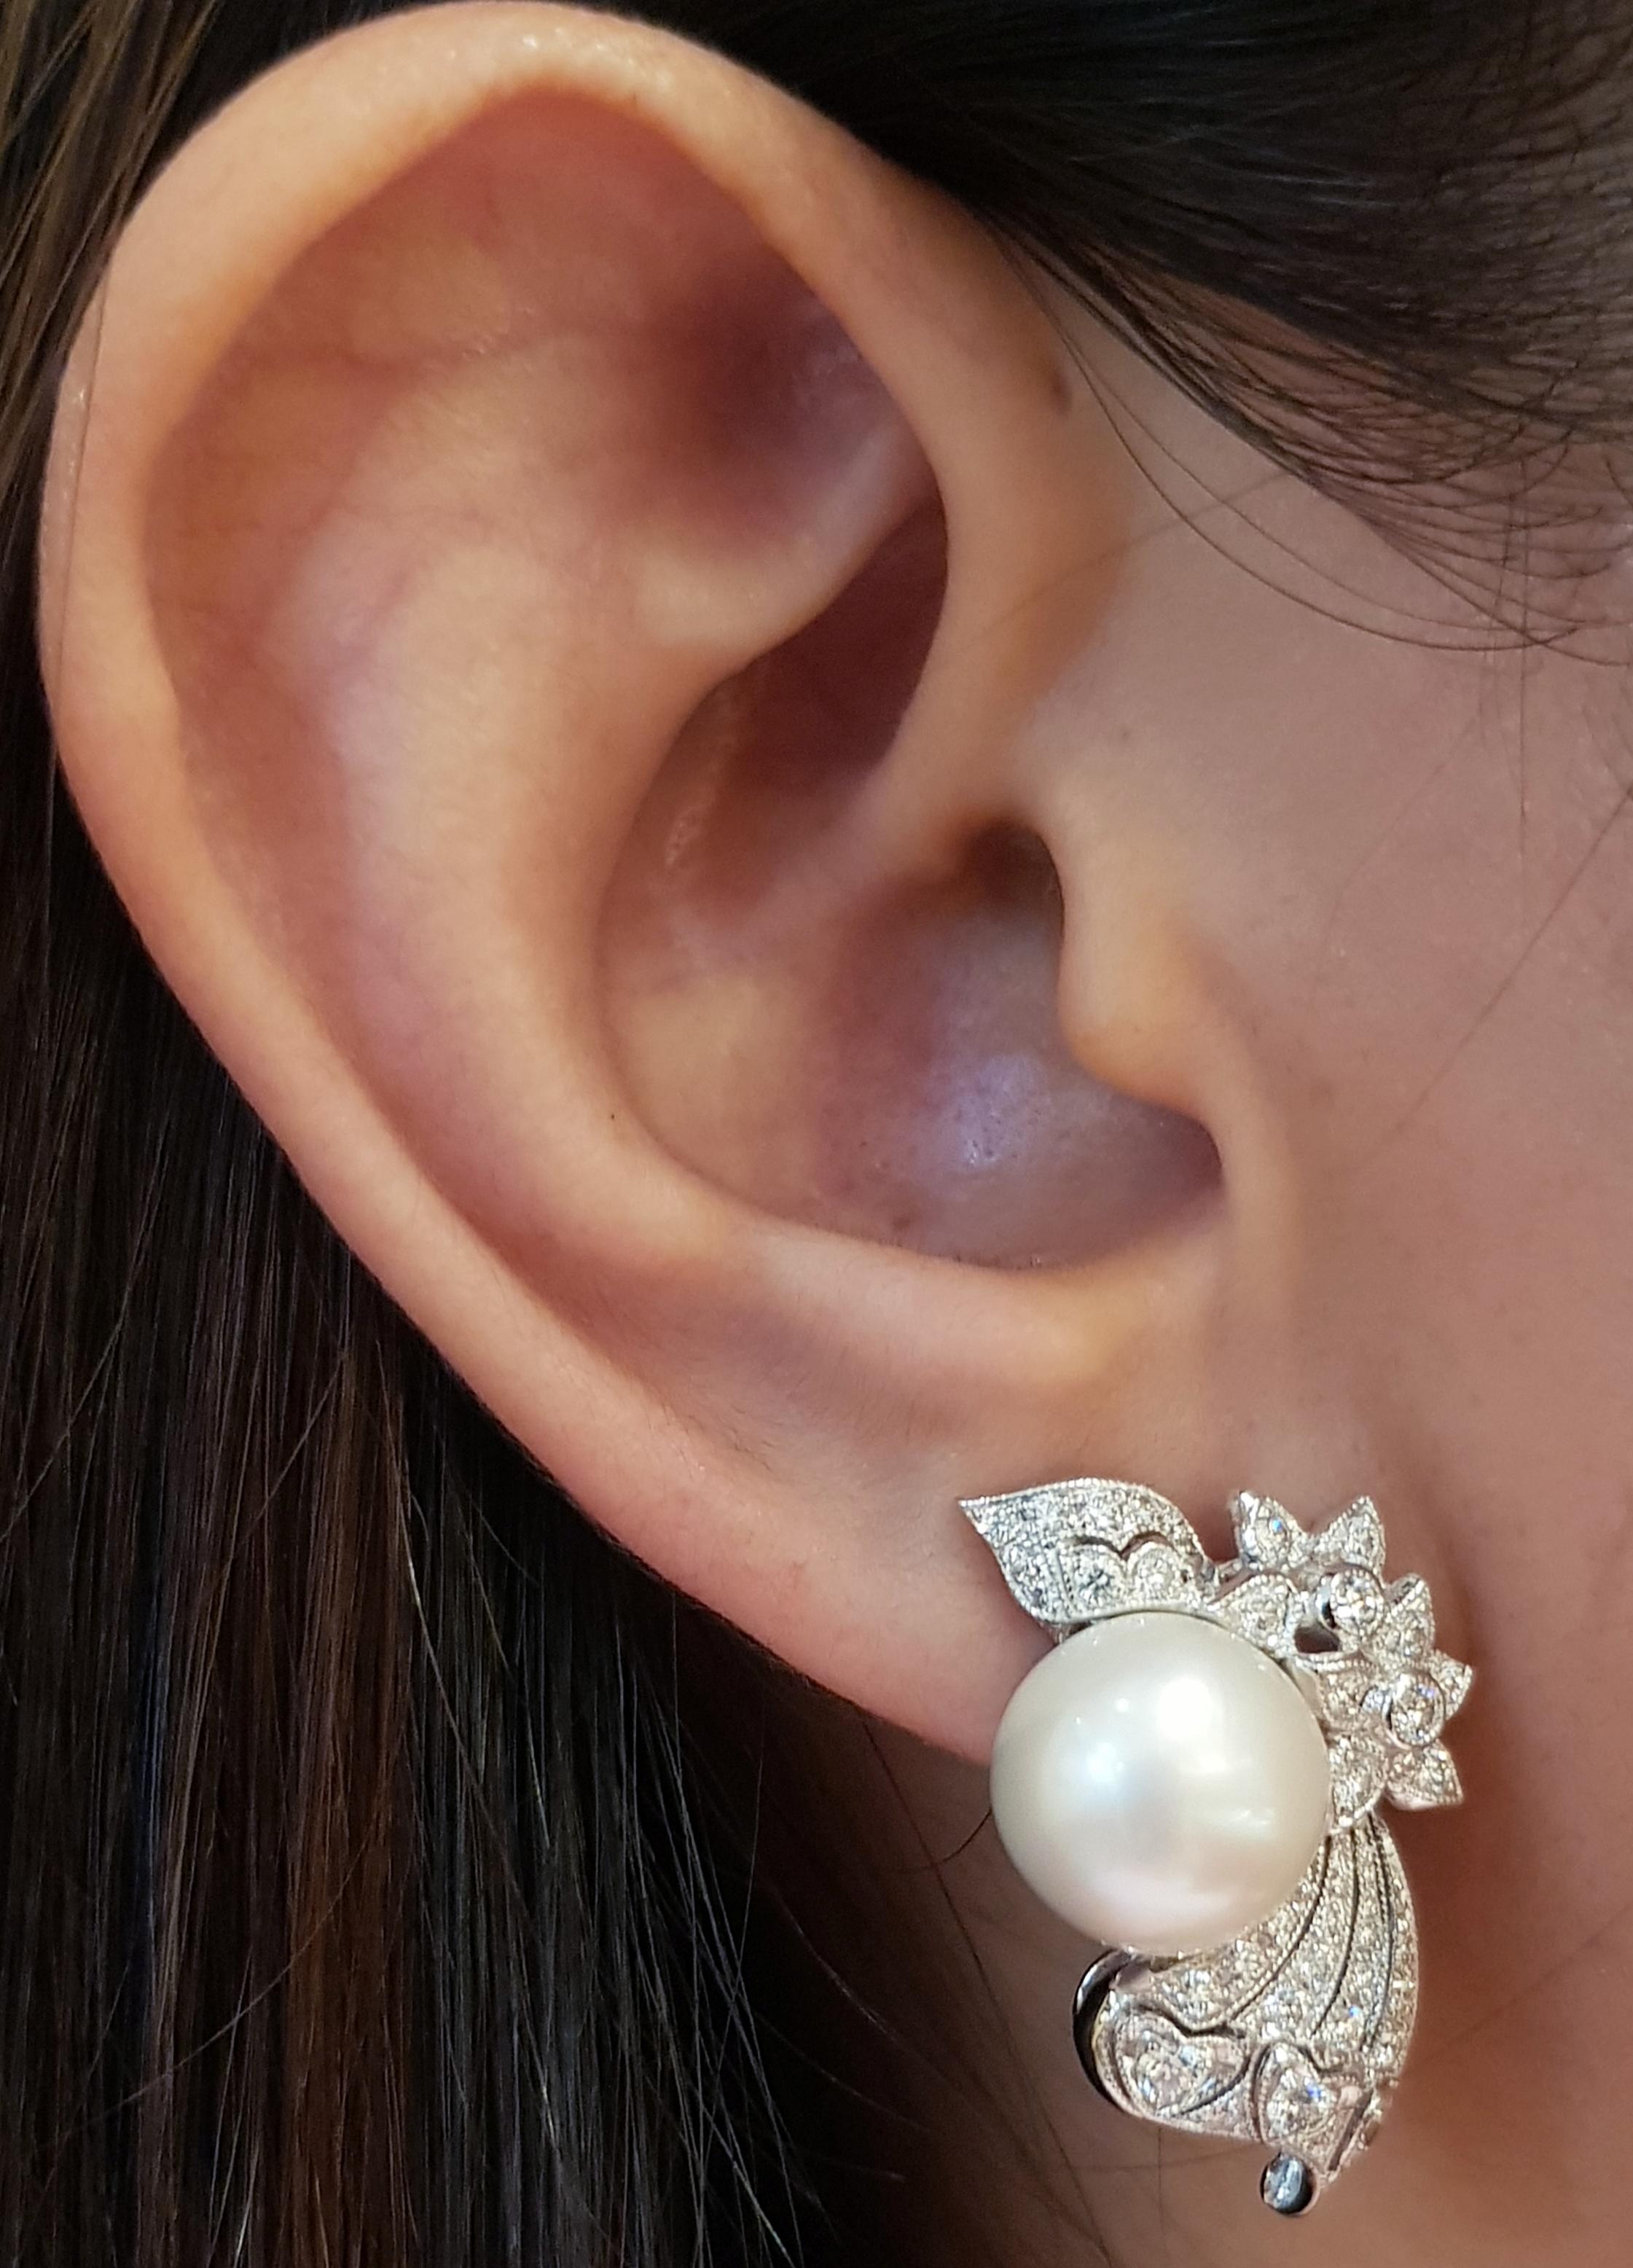 Pearl with Diamond 1.18 carats Earrings set in 18 Karat White Gold Settings

Width:   1.90 cm 
Length:  2.90 cm
Total Weight: 15.12 grams

Pearl: 10.8 mm

